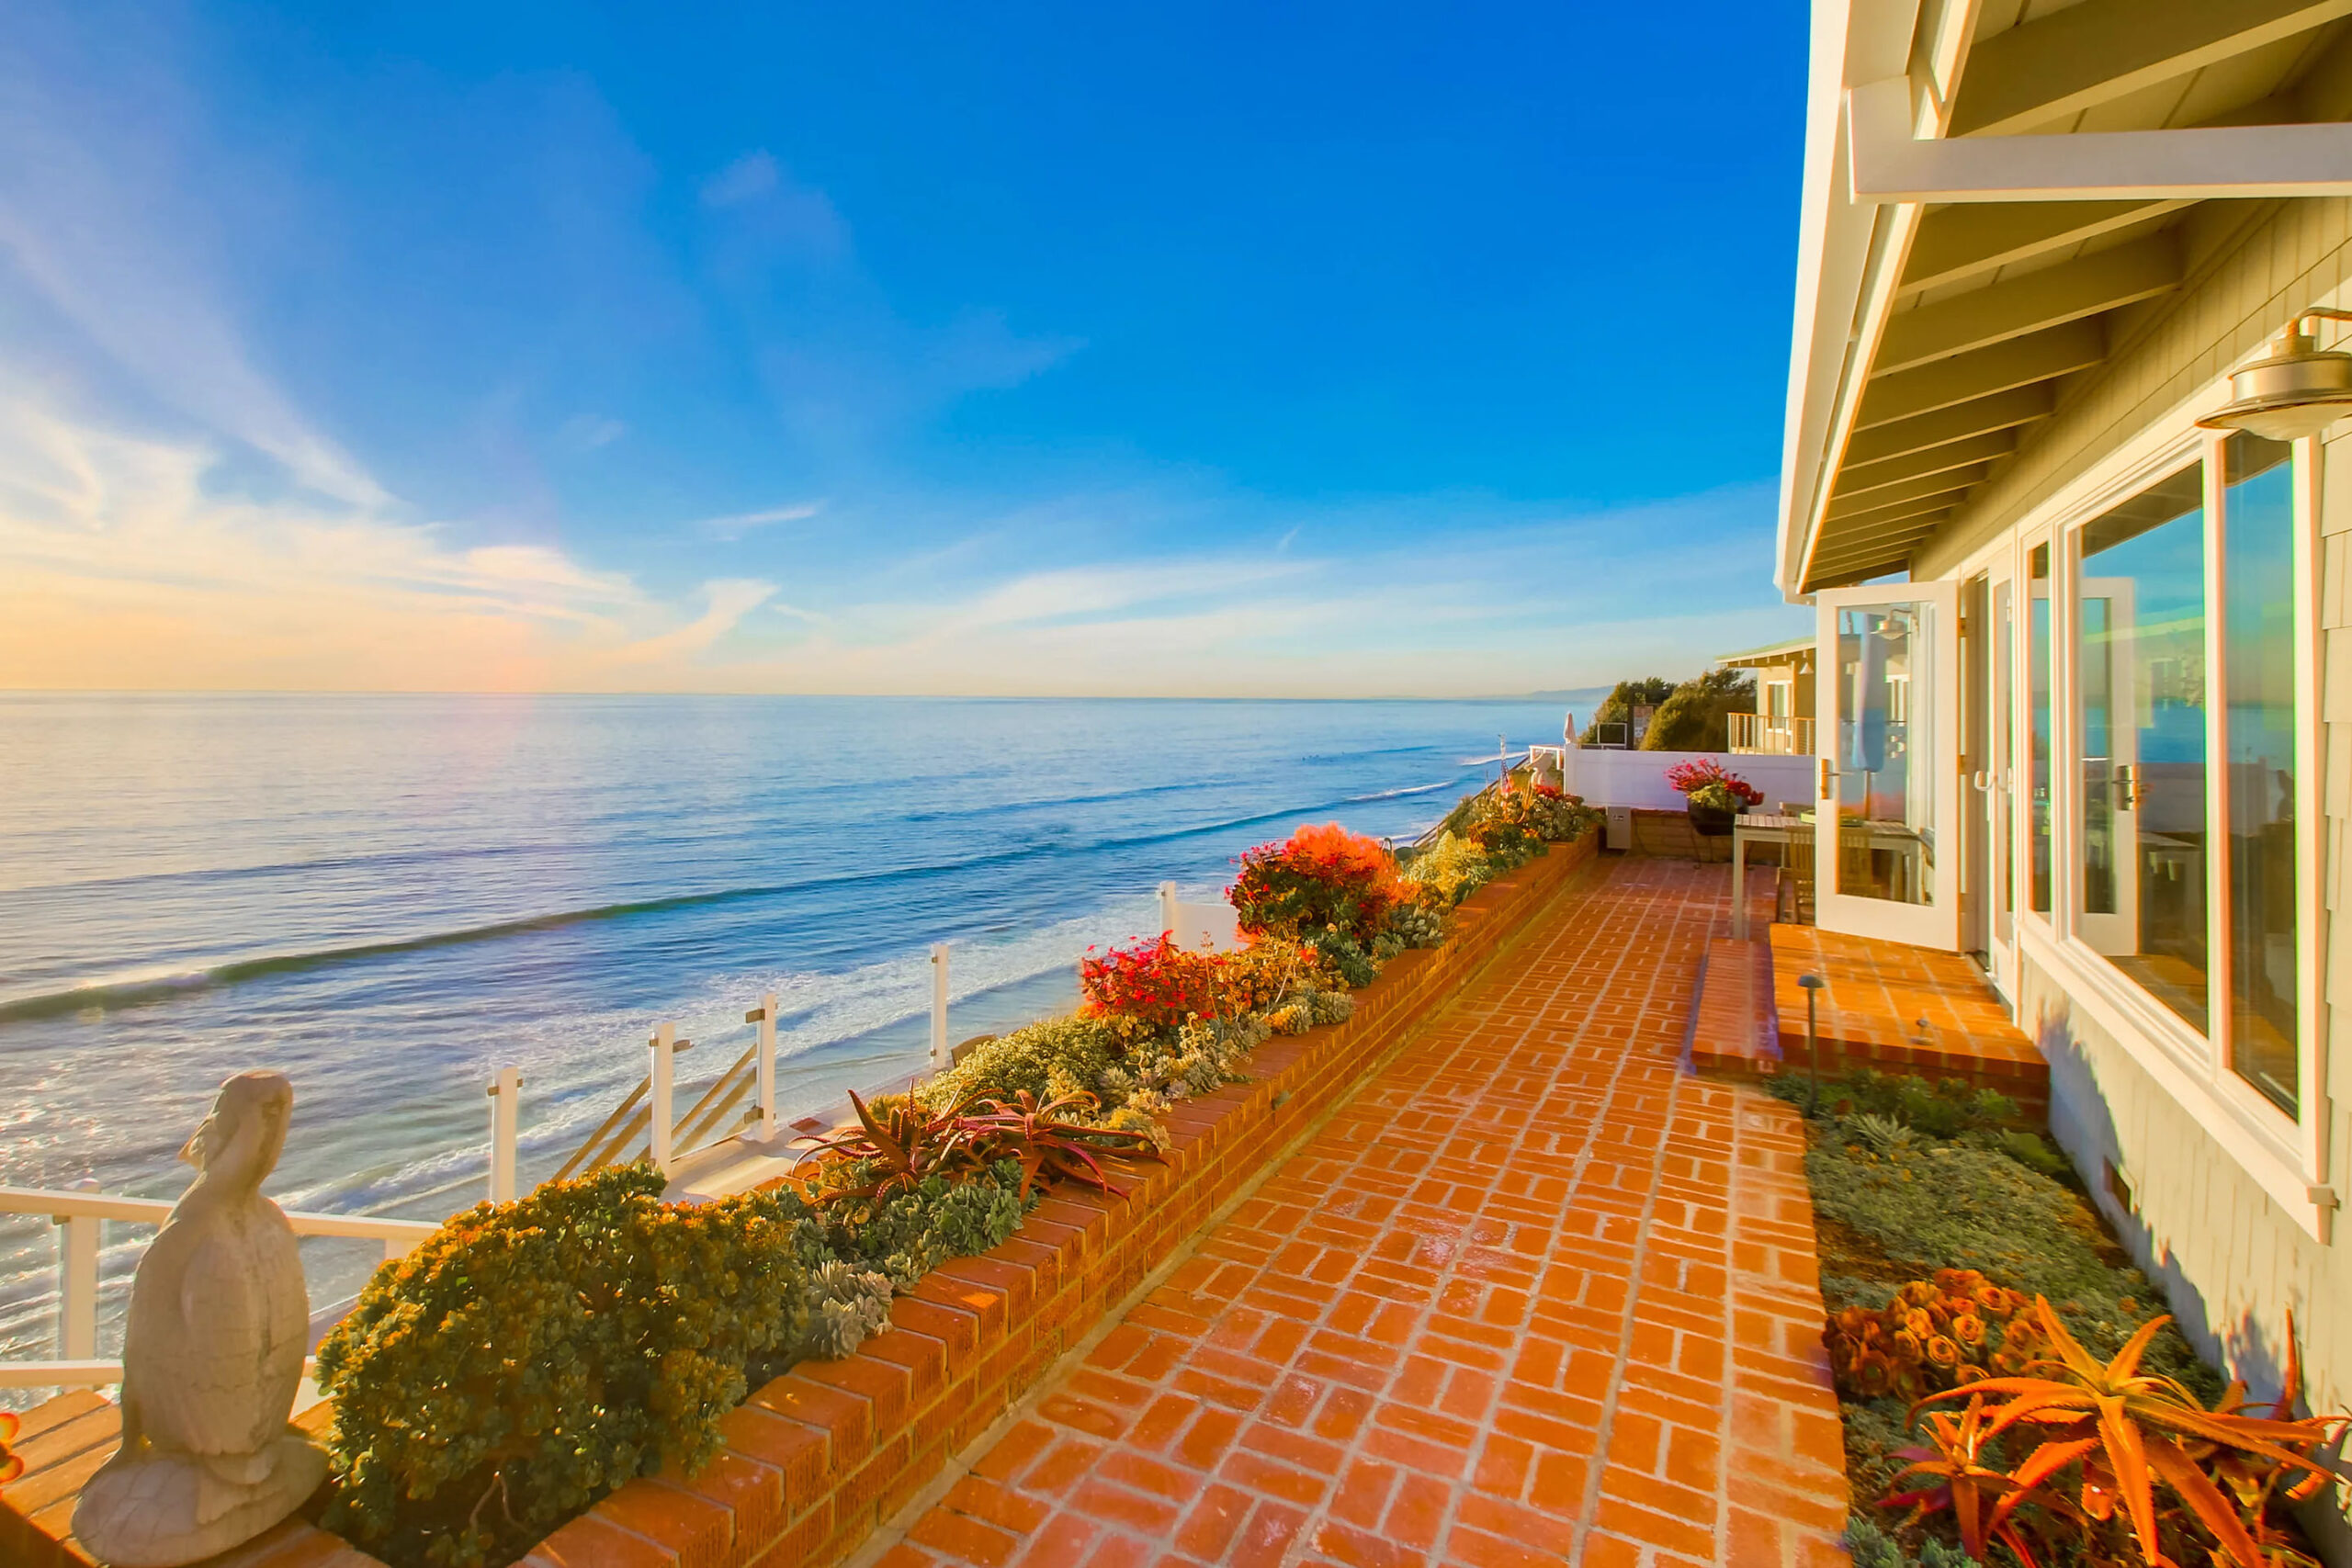 A large brick deck overlooking the Pacific Ocean in Southern California.